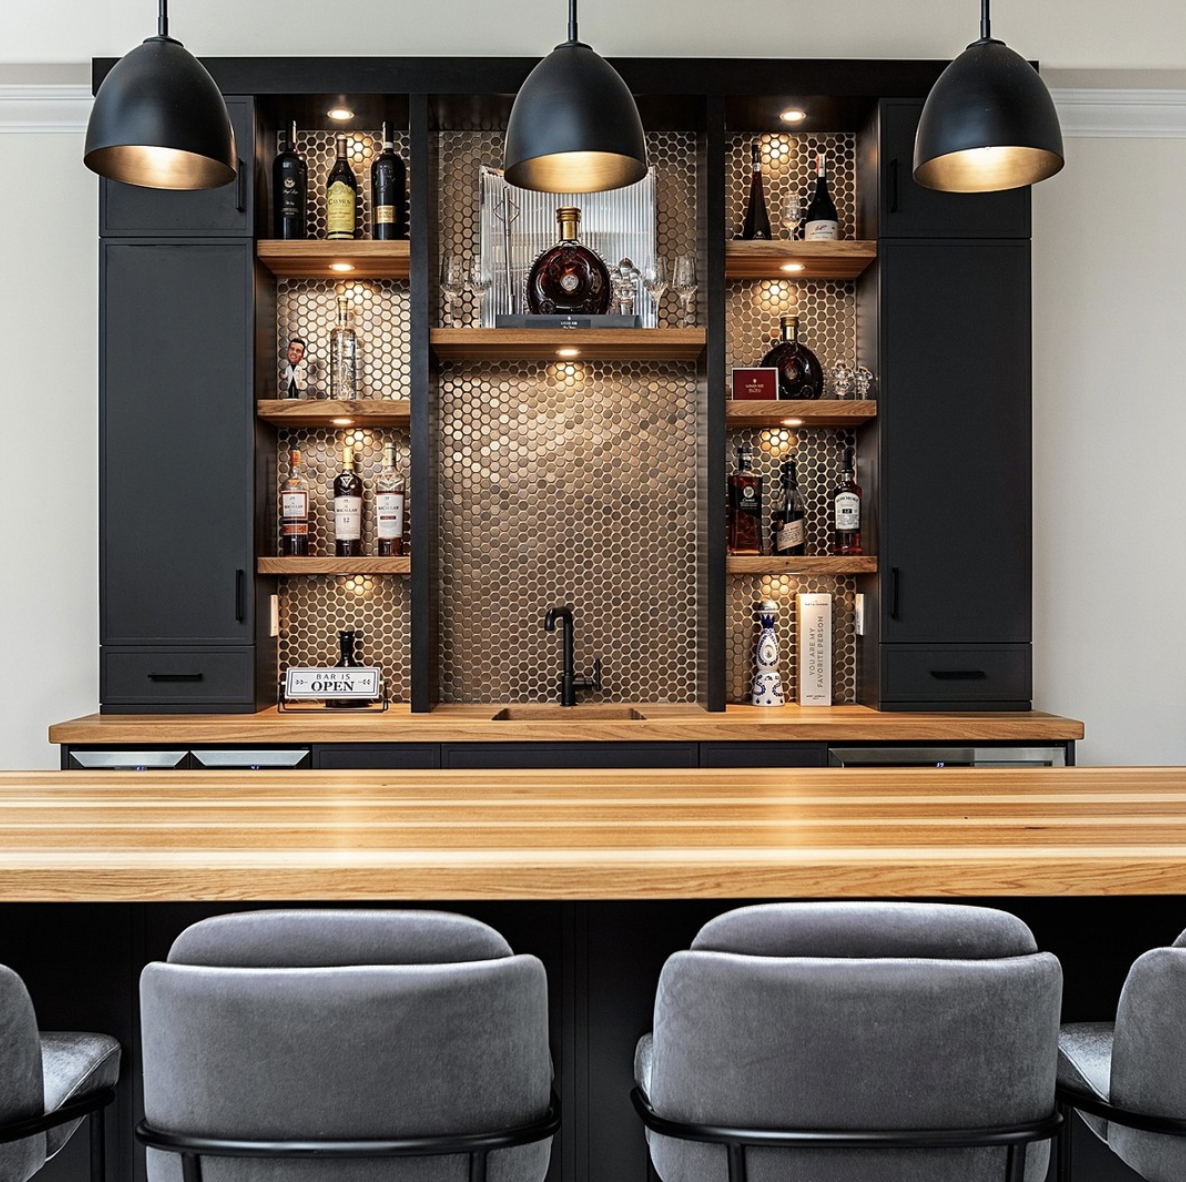 Luxe Looks in Limited Space: Basement Bar Ideas for Small Spaces Design